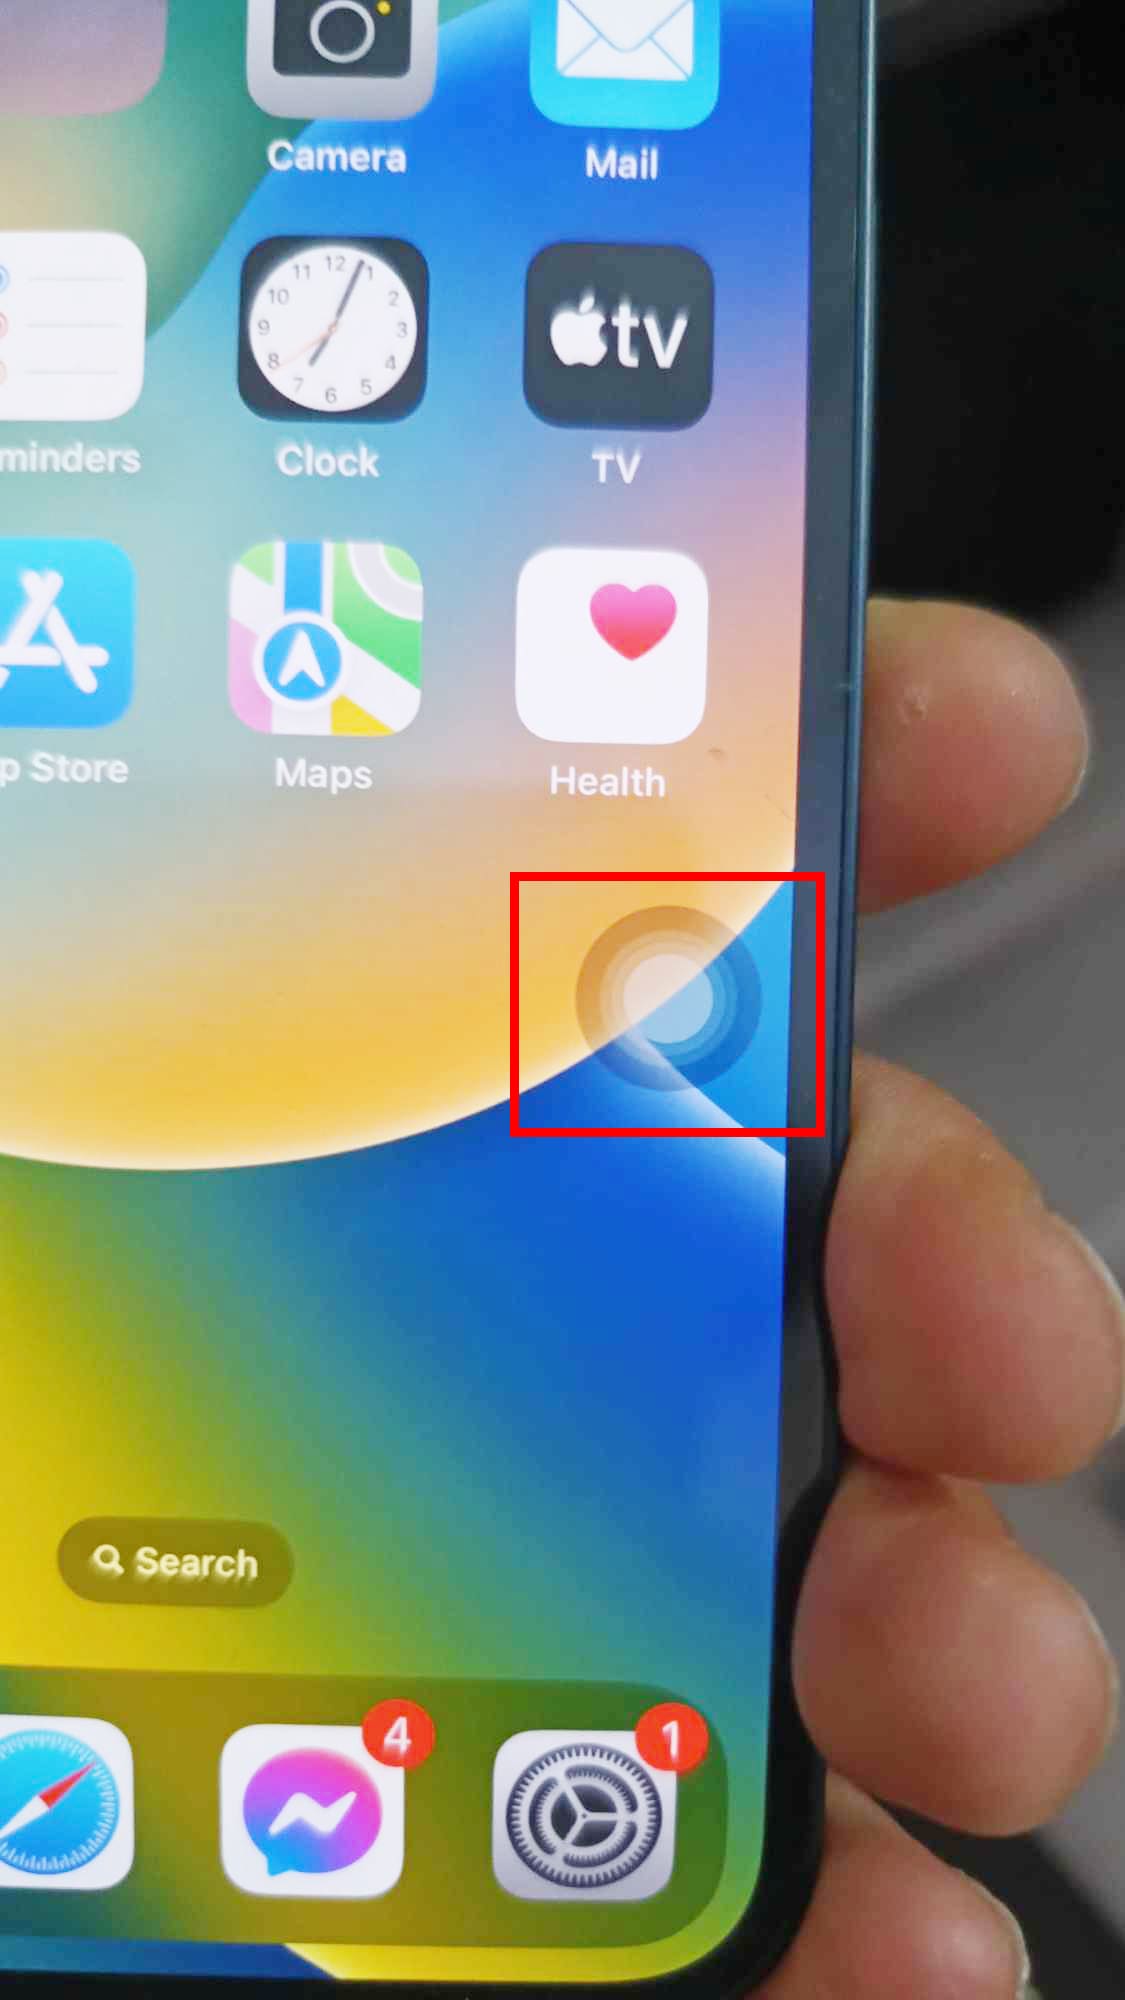 The AssistiveTouch button on iPhone